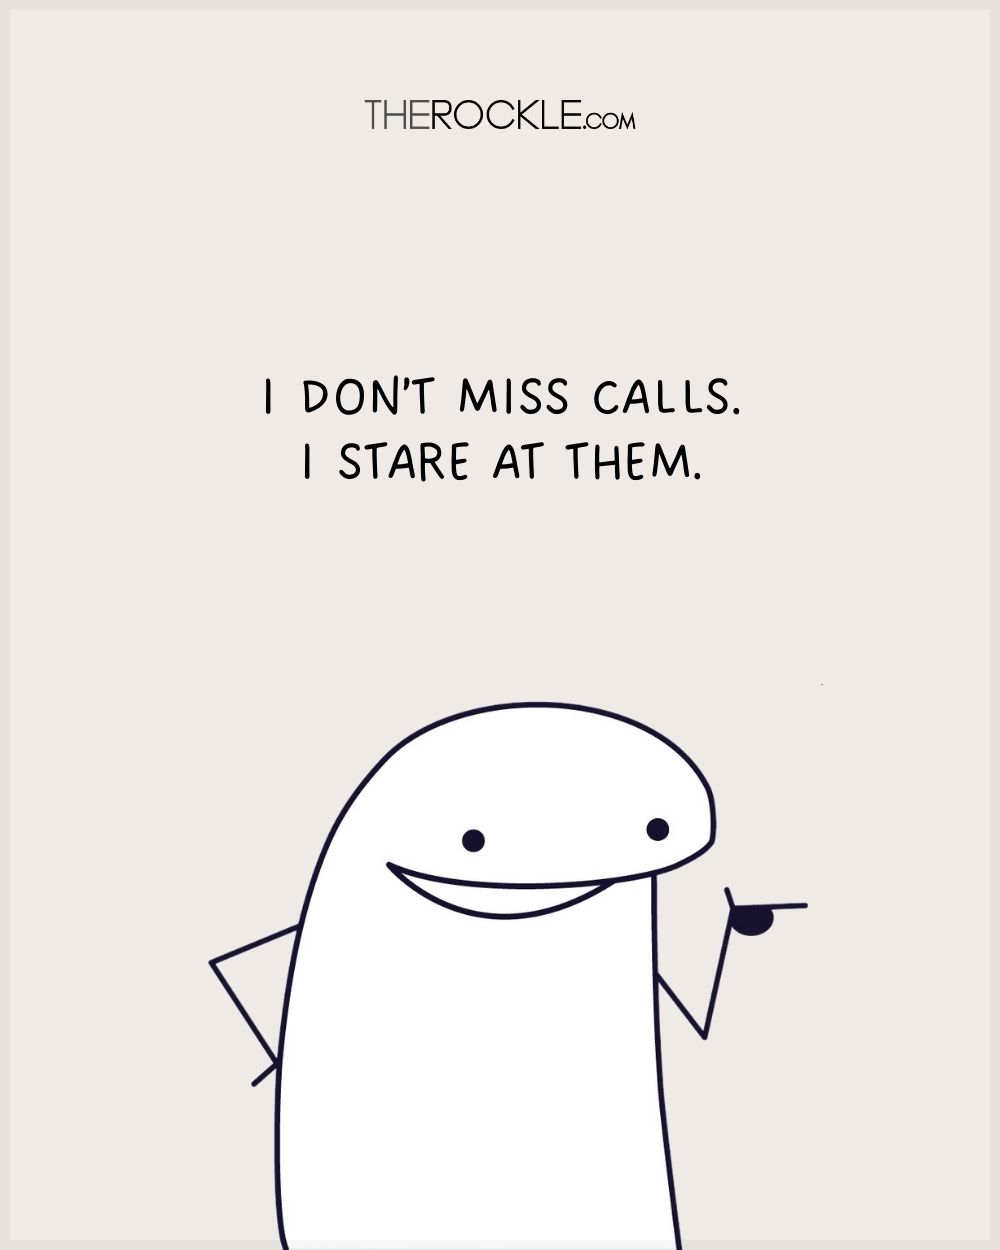 Funny quip on introverts and phone calls